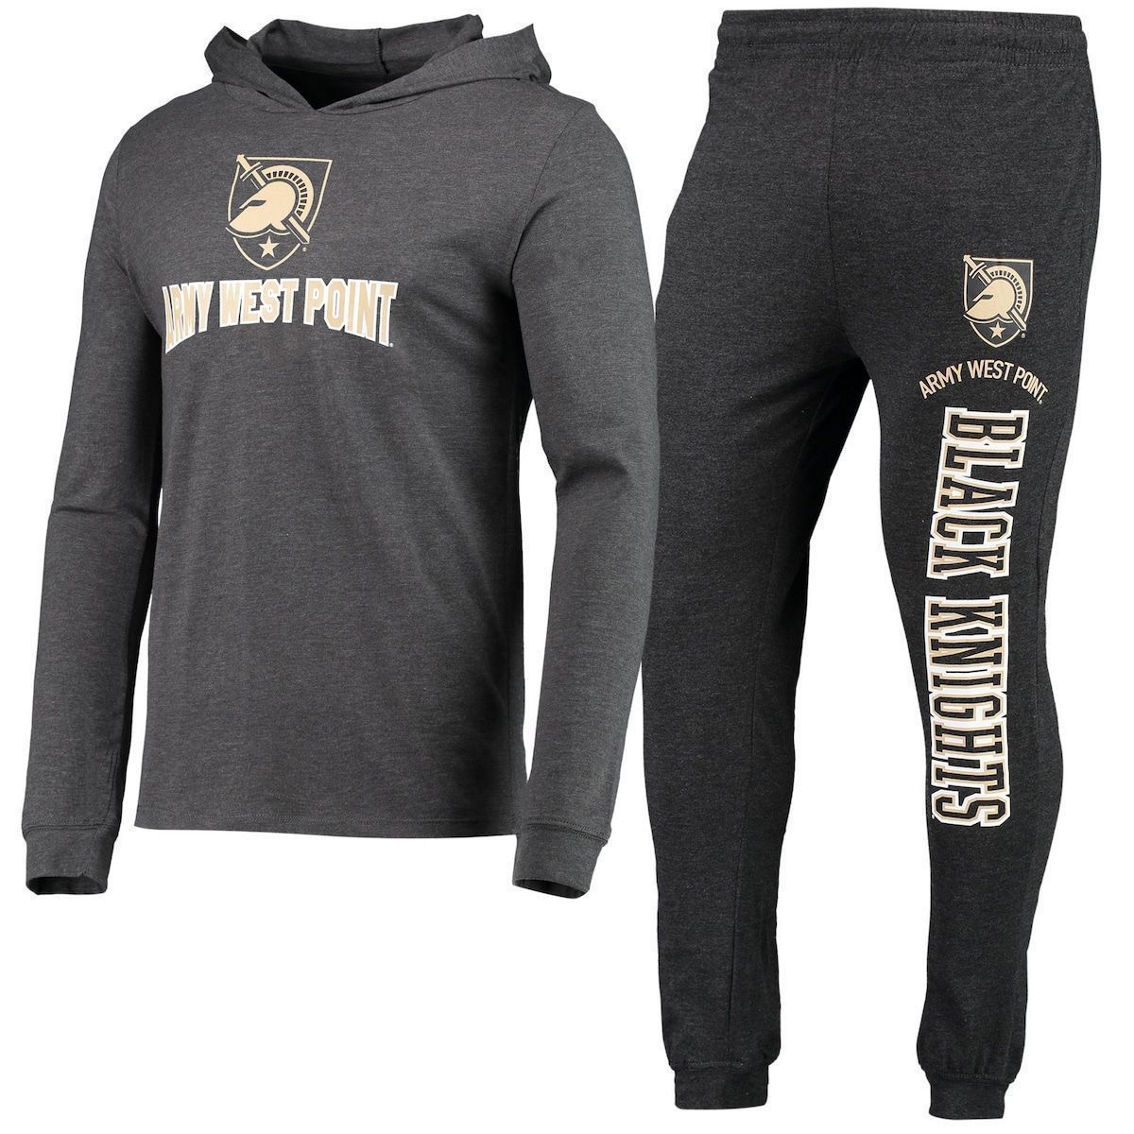 Men's Concepts Sport Heathered Black/Heathered Charcoal Army Black Knights Meter Long Sleeve Hoodie T-Shirt & Jogger Pants Set - Image 2 of 4